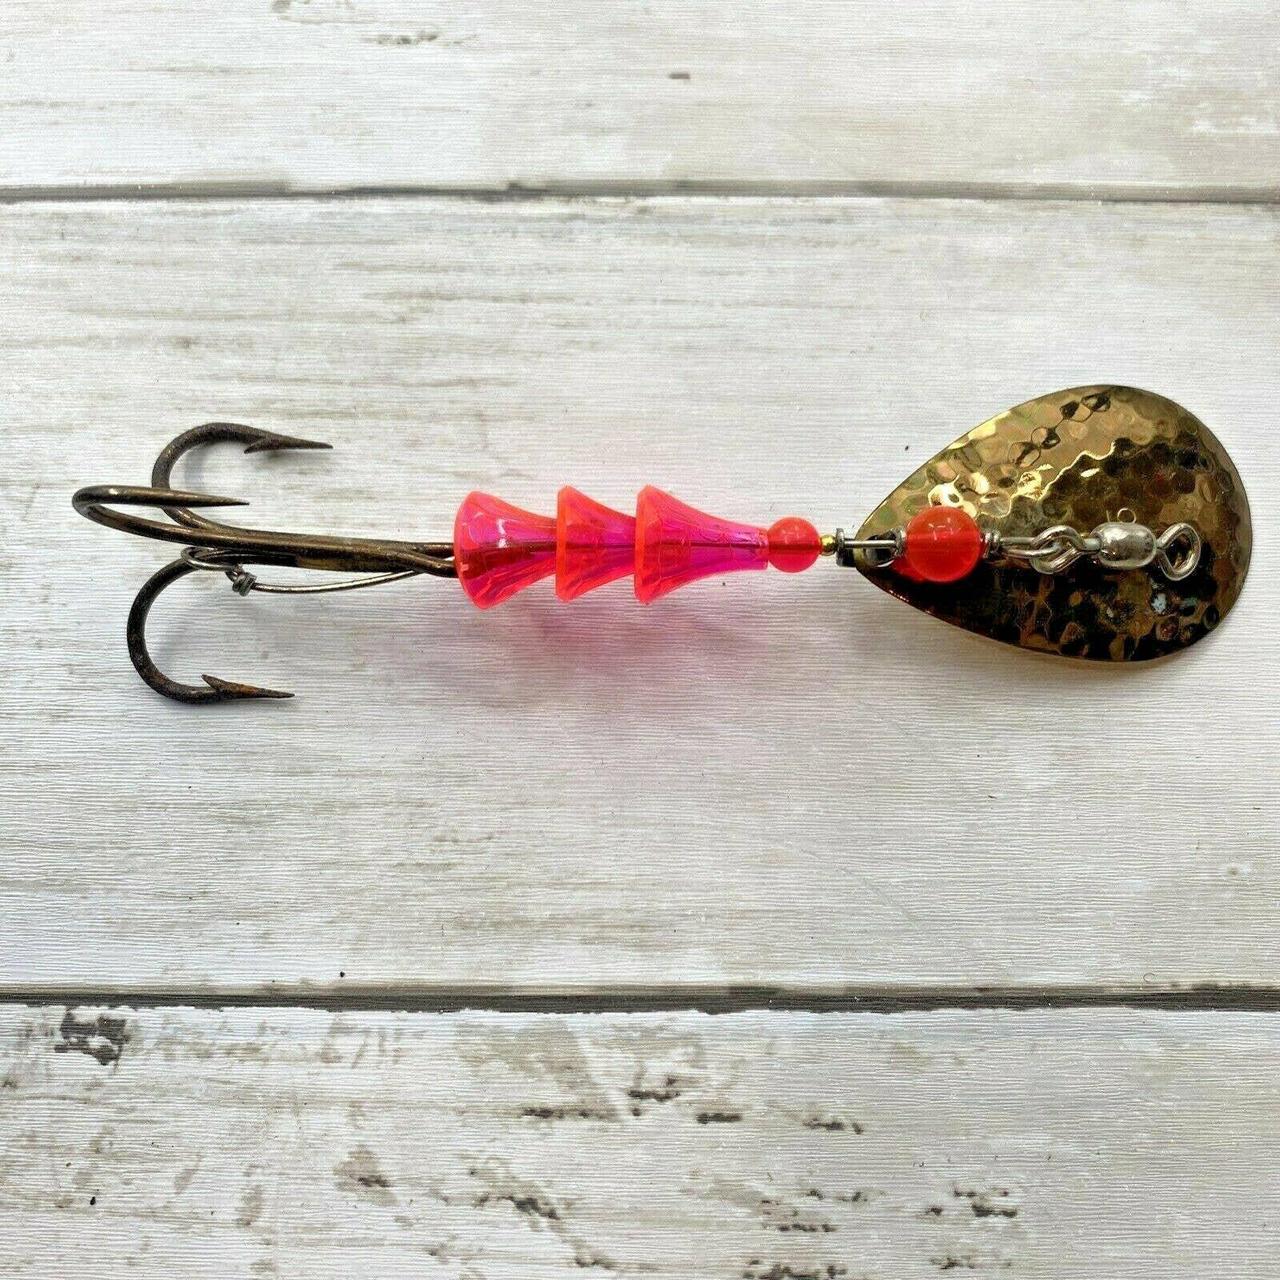 Vintage Fishing Lure Psychedelic Hot Pink Red - Depop